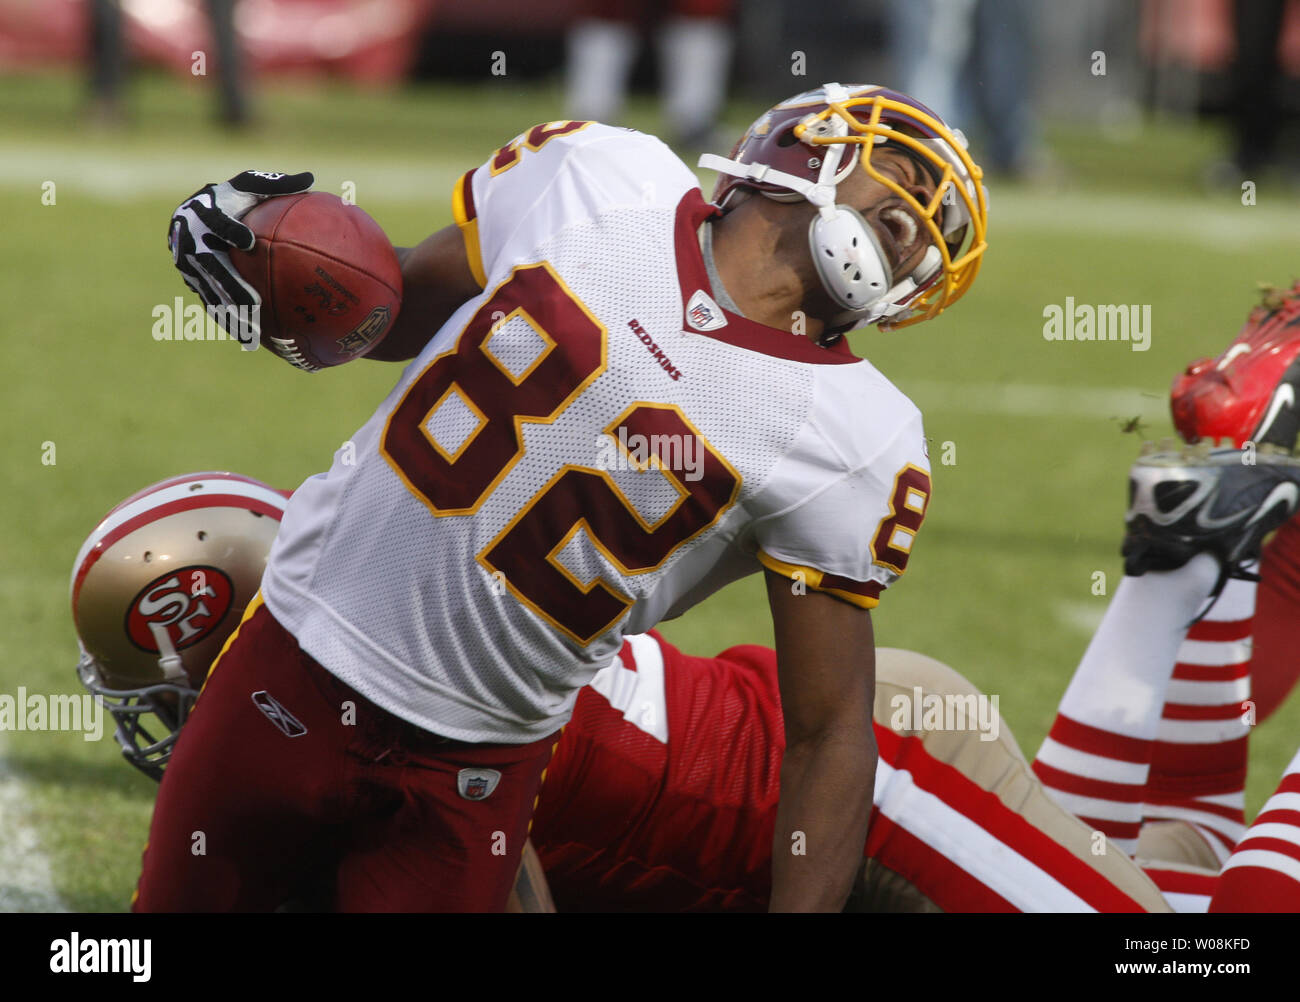 Washington Redskins WR Antwaan Randle El grimaces as he is taken down by San Francisco 49ers Michael Lewis in the third quarter at Candlestick Park in San Francisco on December 28, 2008. The Niners defeated the Redskins 27-24.   (UPI Photo/Terry Schmitt) Stock Photo